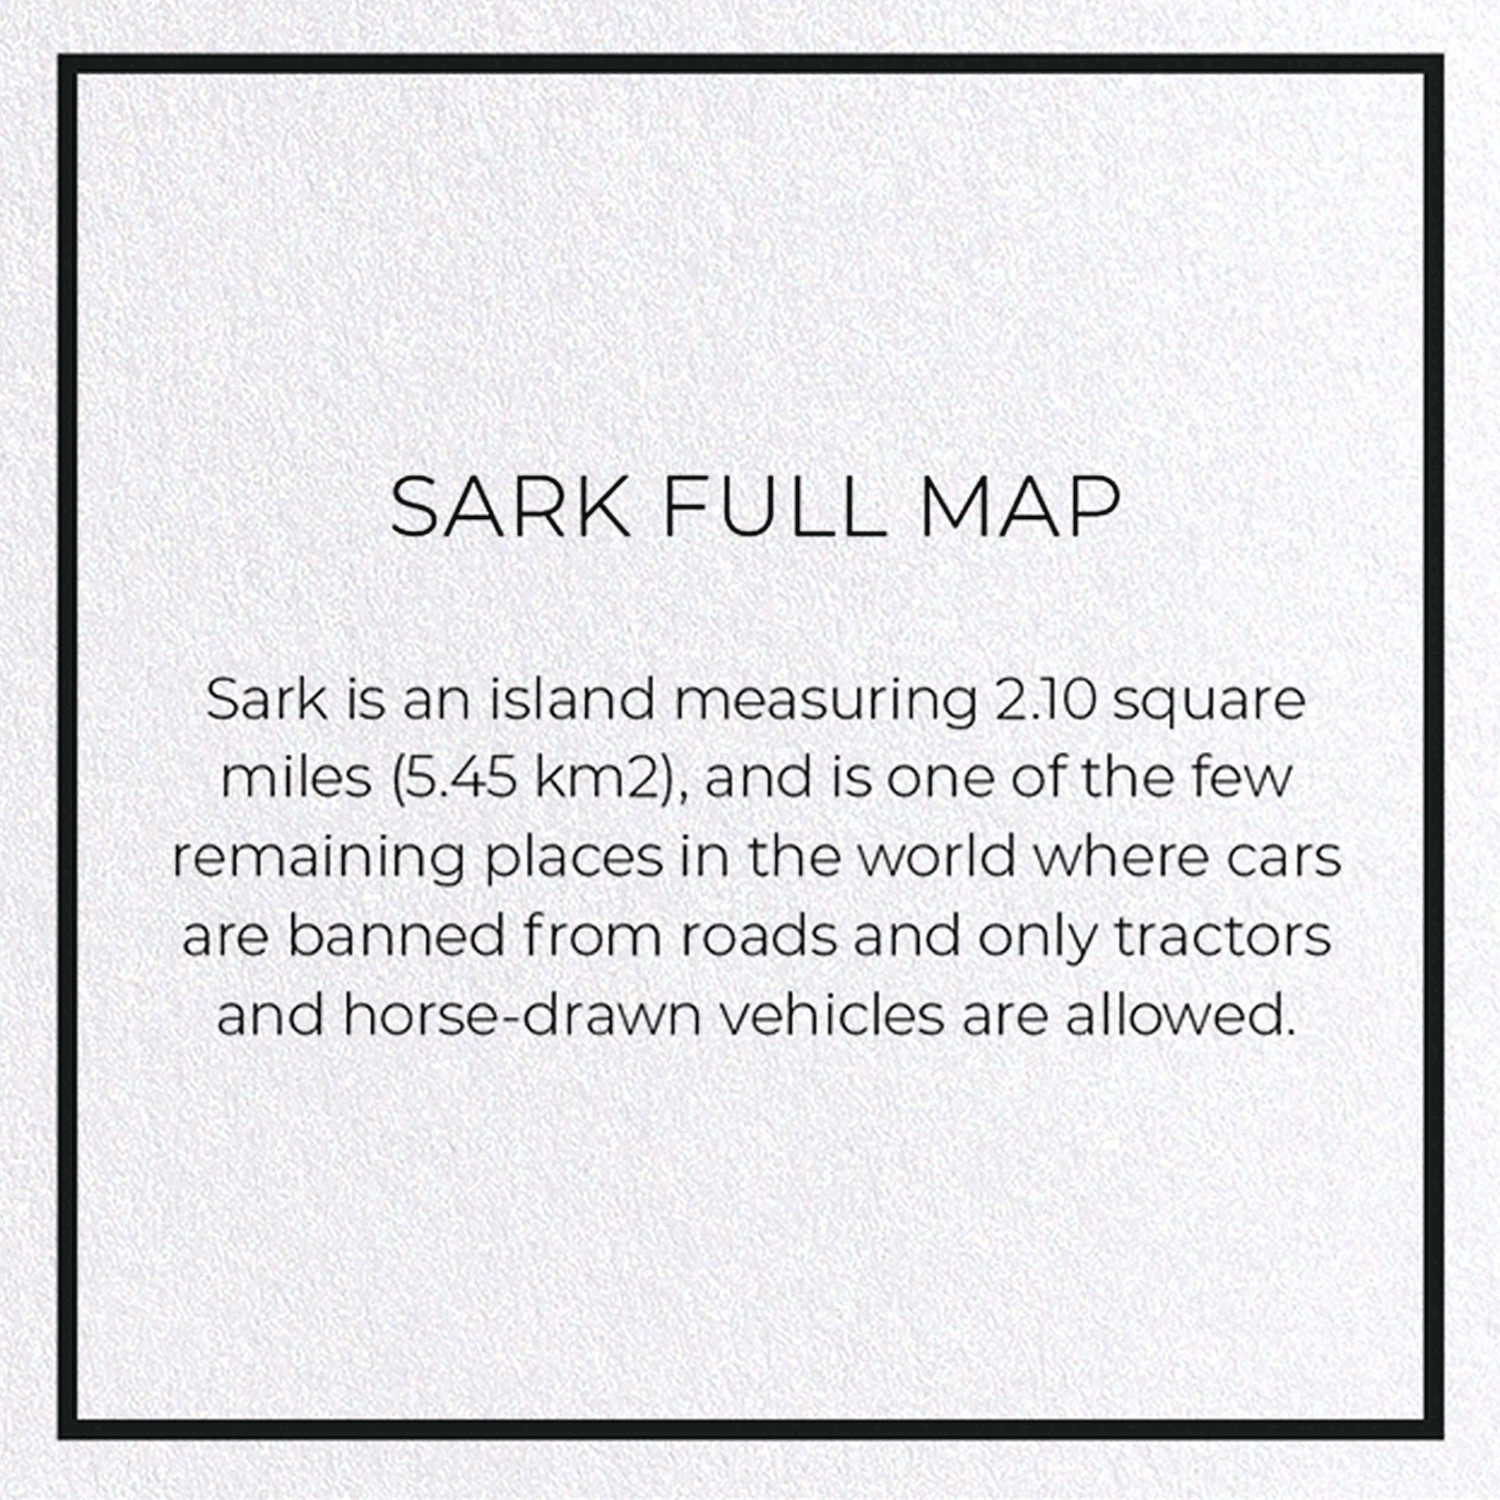 SARK FULL MAP: 8xCards